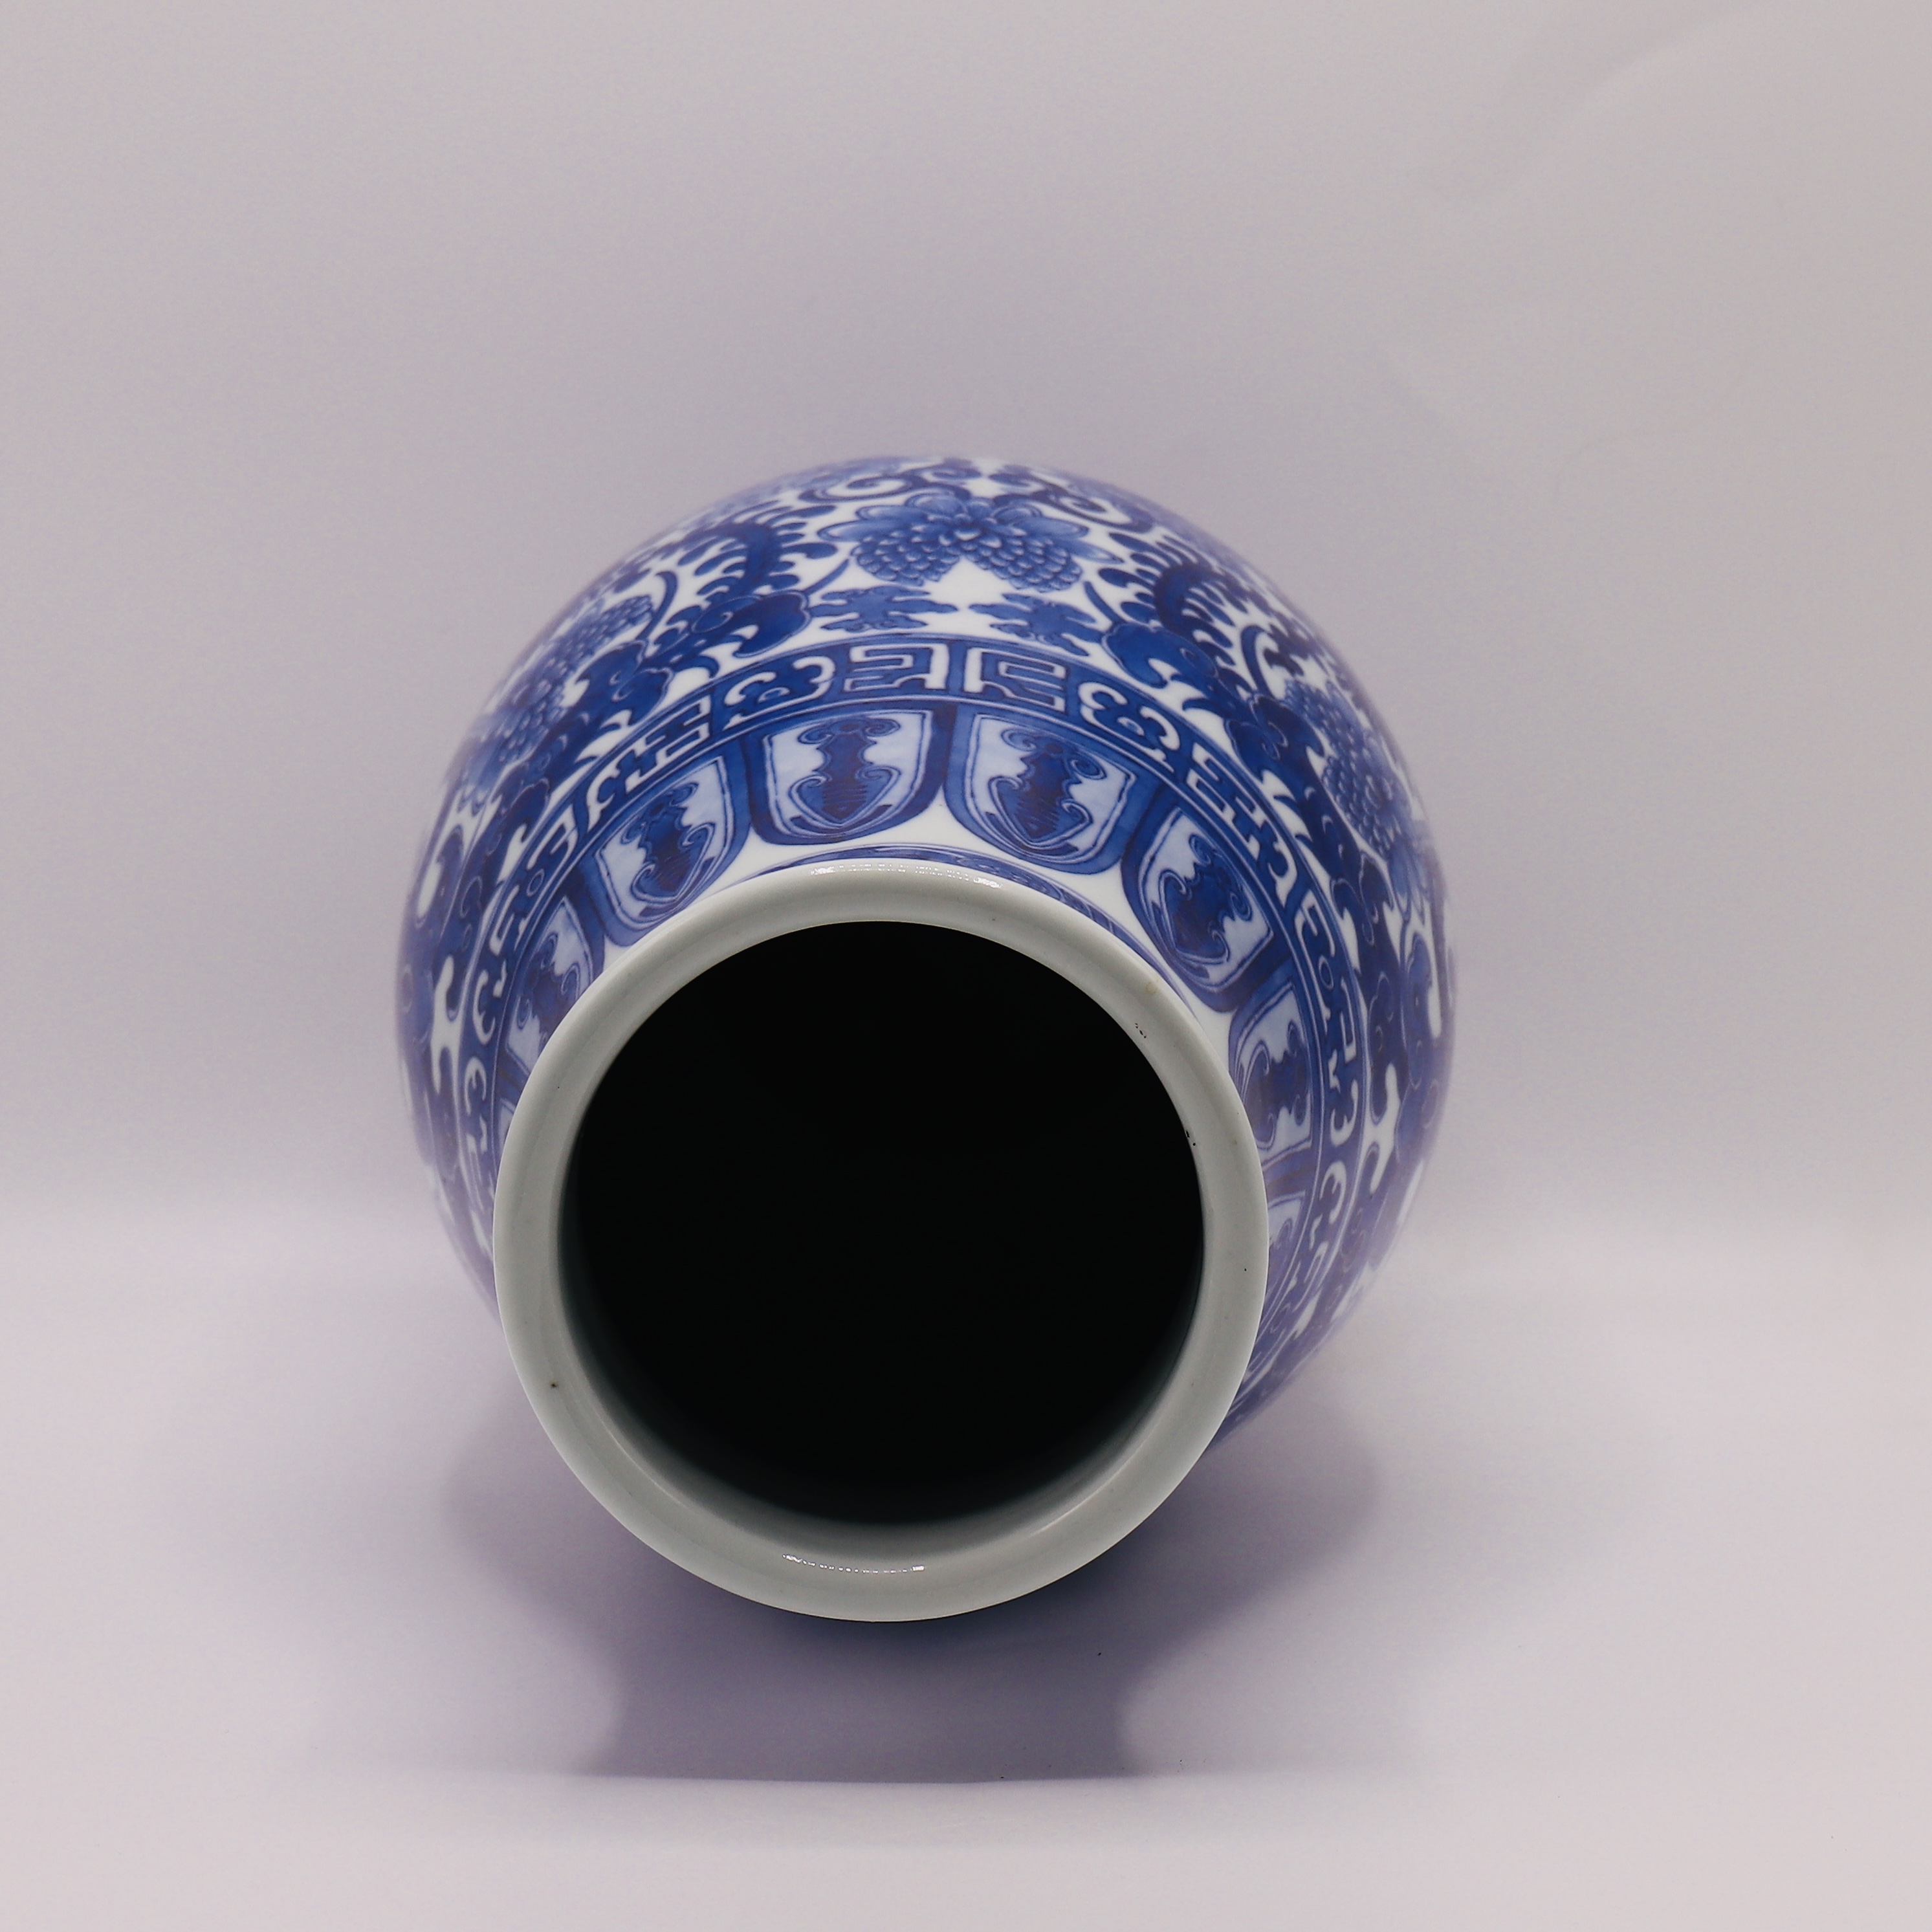 A CHINESE BLUE & WHITE VASE, QIANLONG SEAL MARK BUT PROBABLY LATER QING DYNASTY (1644-1911) - Image 4 of 6